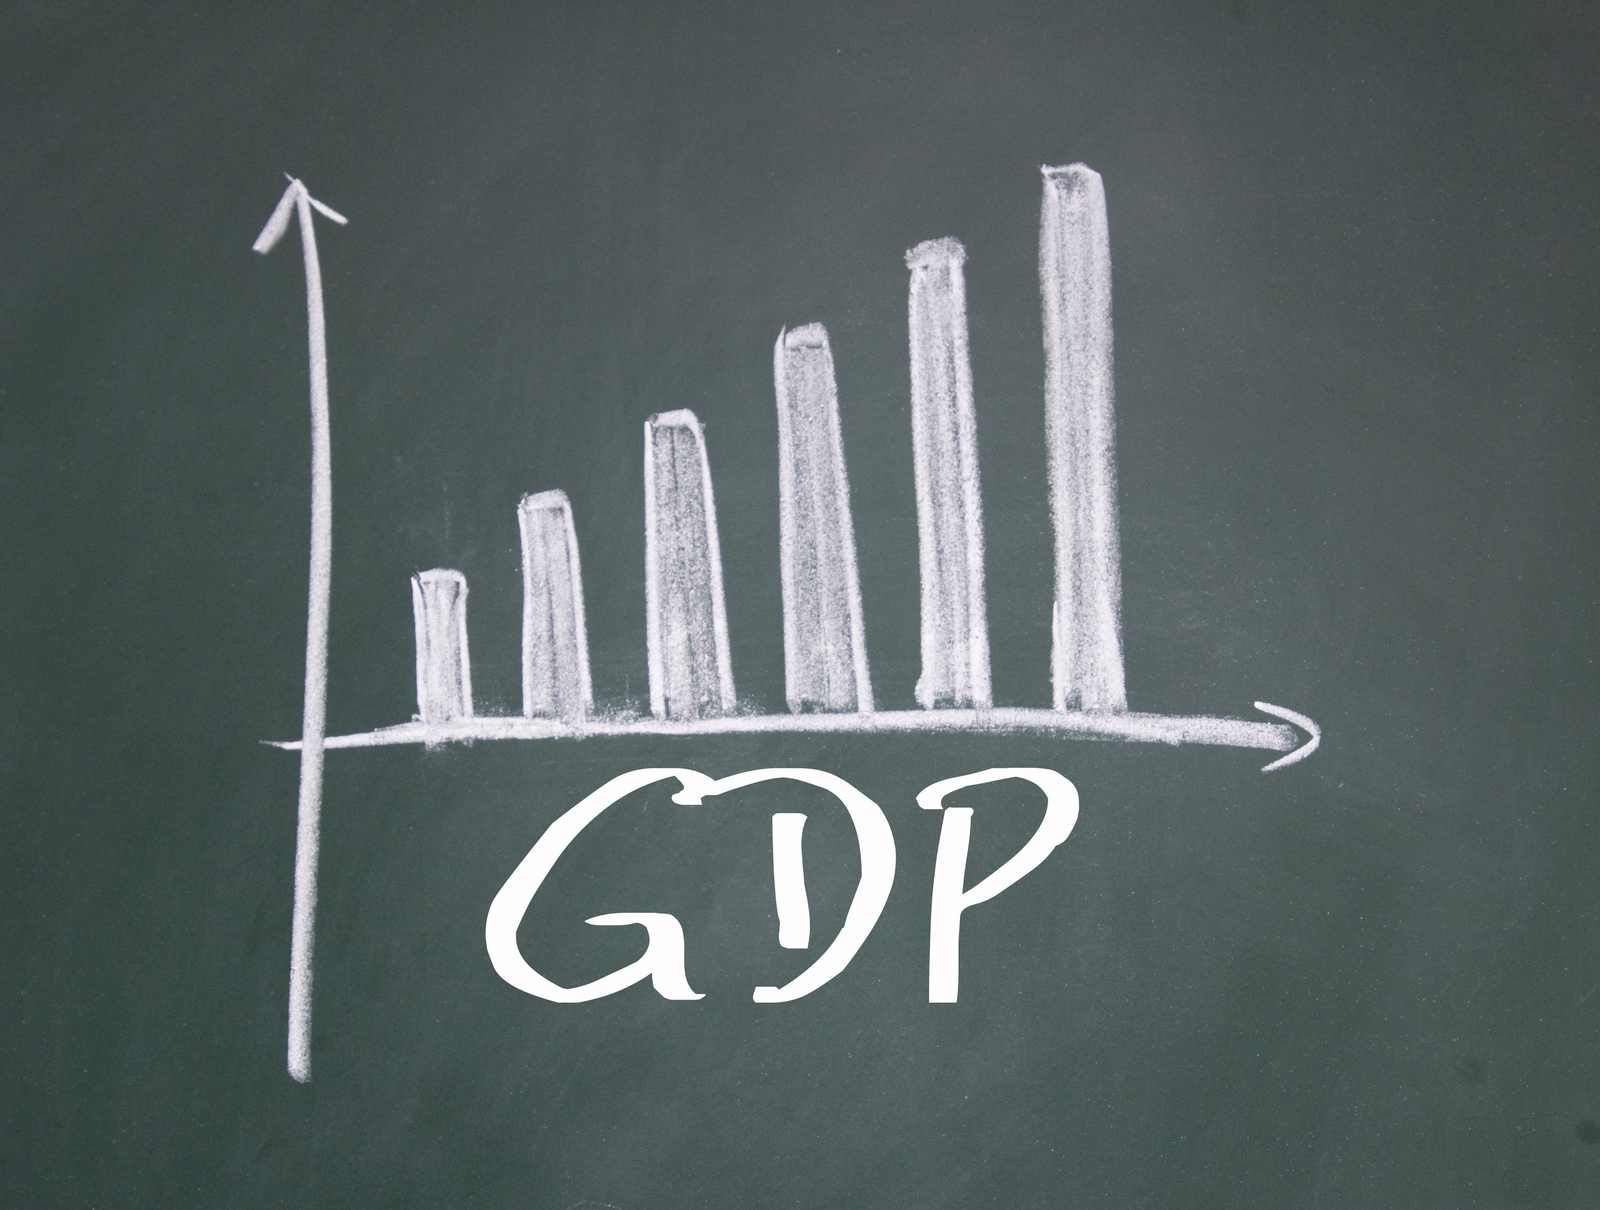 Real Economic Growth Rate: Definition, Calculation, and Uses